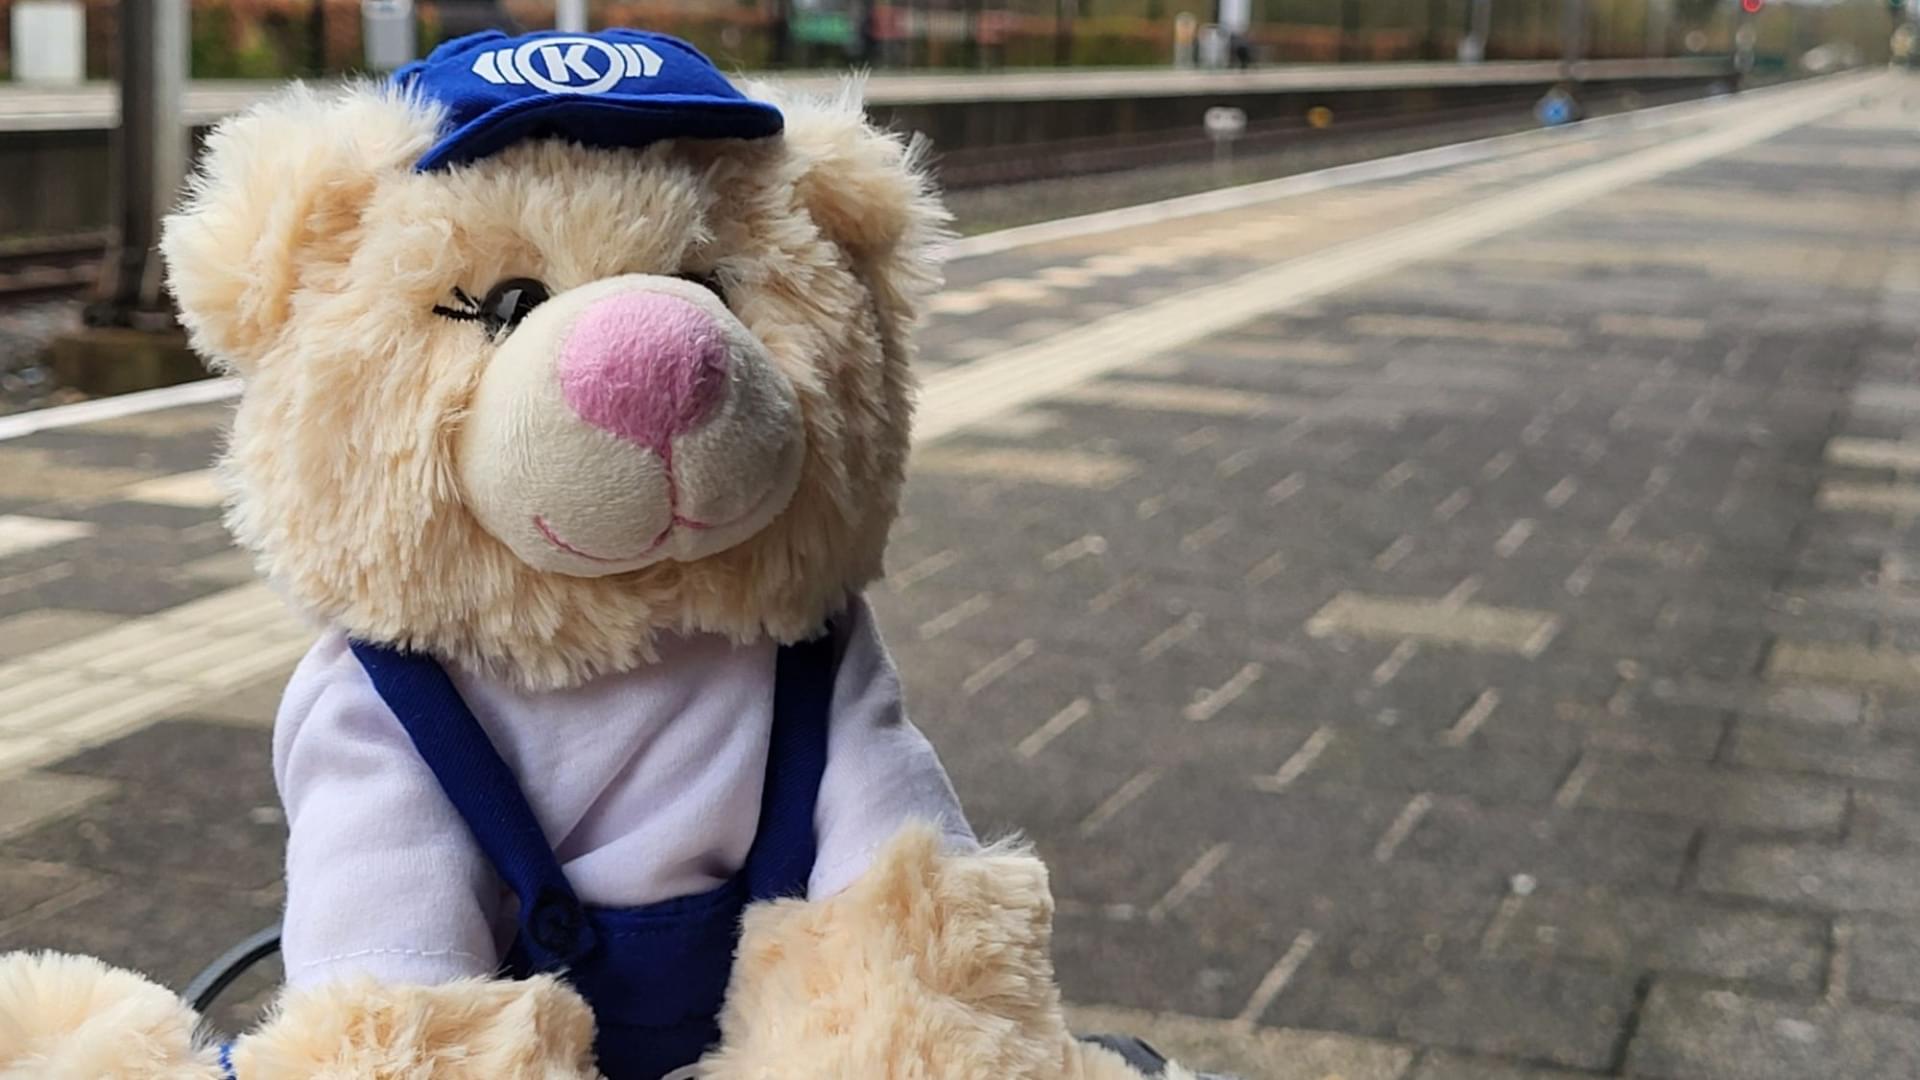 Mascot of Knorr-Bremse, a teddy bear called Knorr-Berta, at a train station